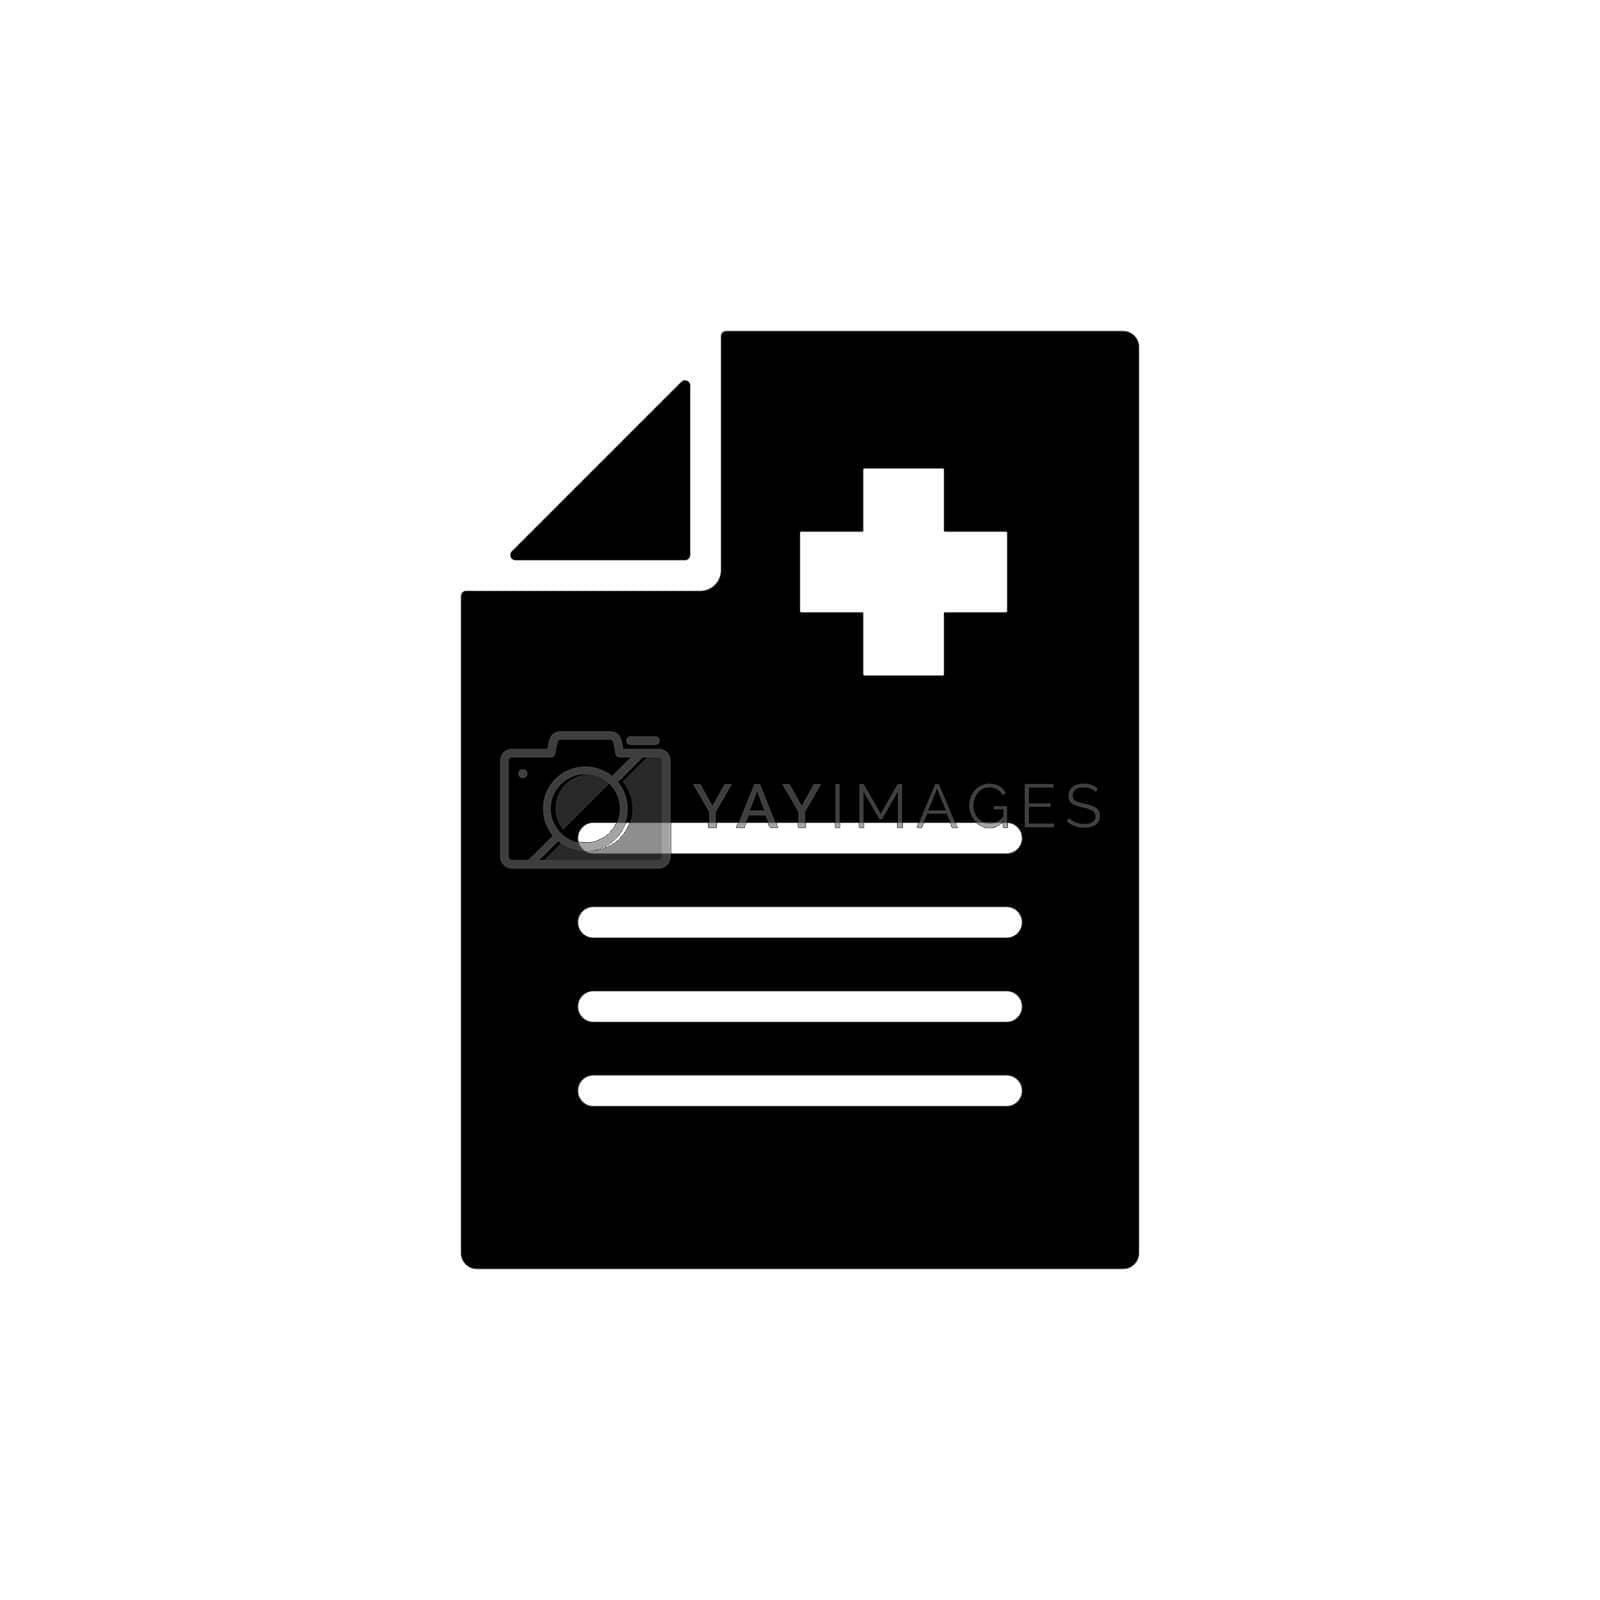 Royalty free image of Medical report, clinical record vector glyph icon by nosik